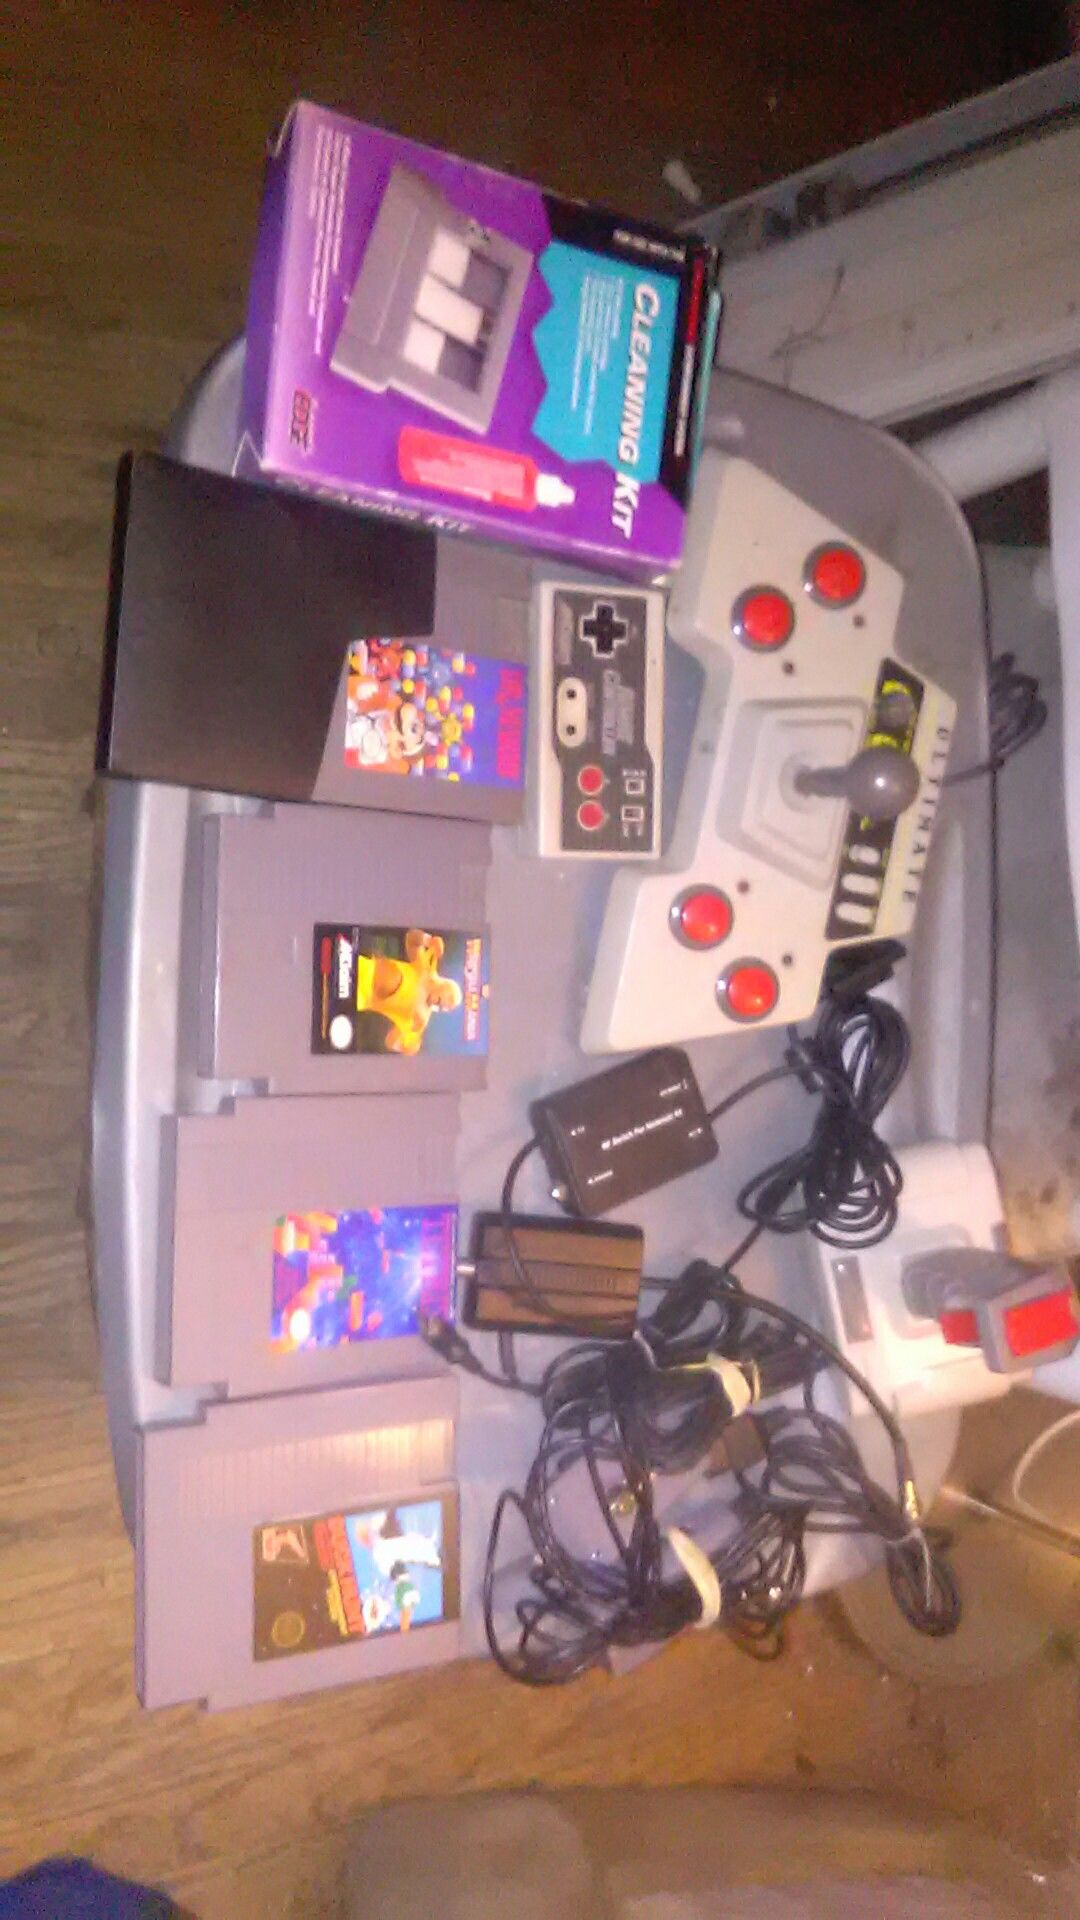 NES Stuff $30 for all